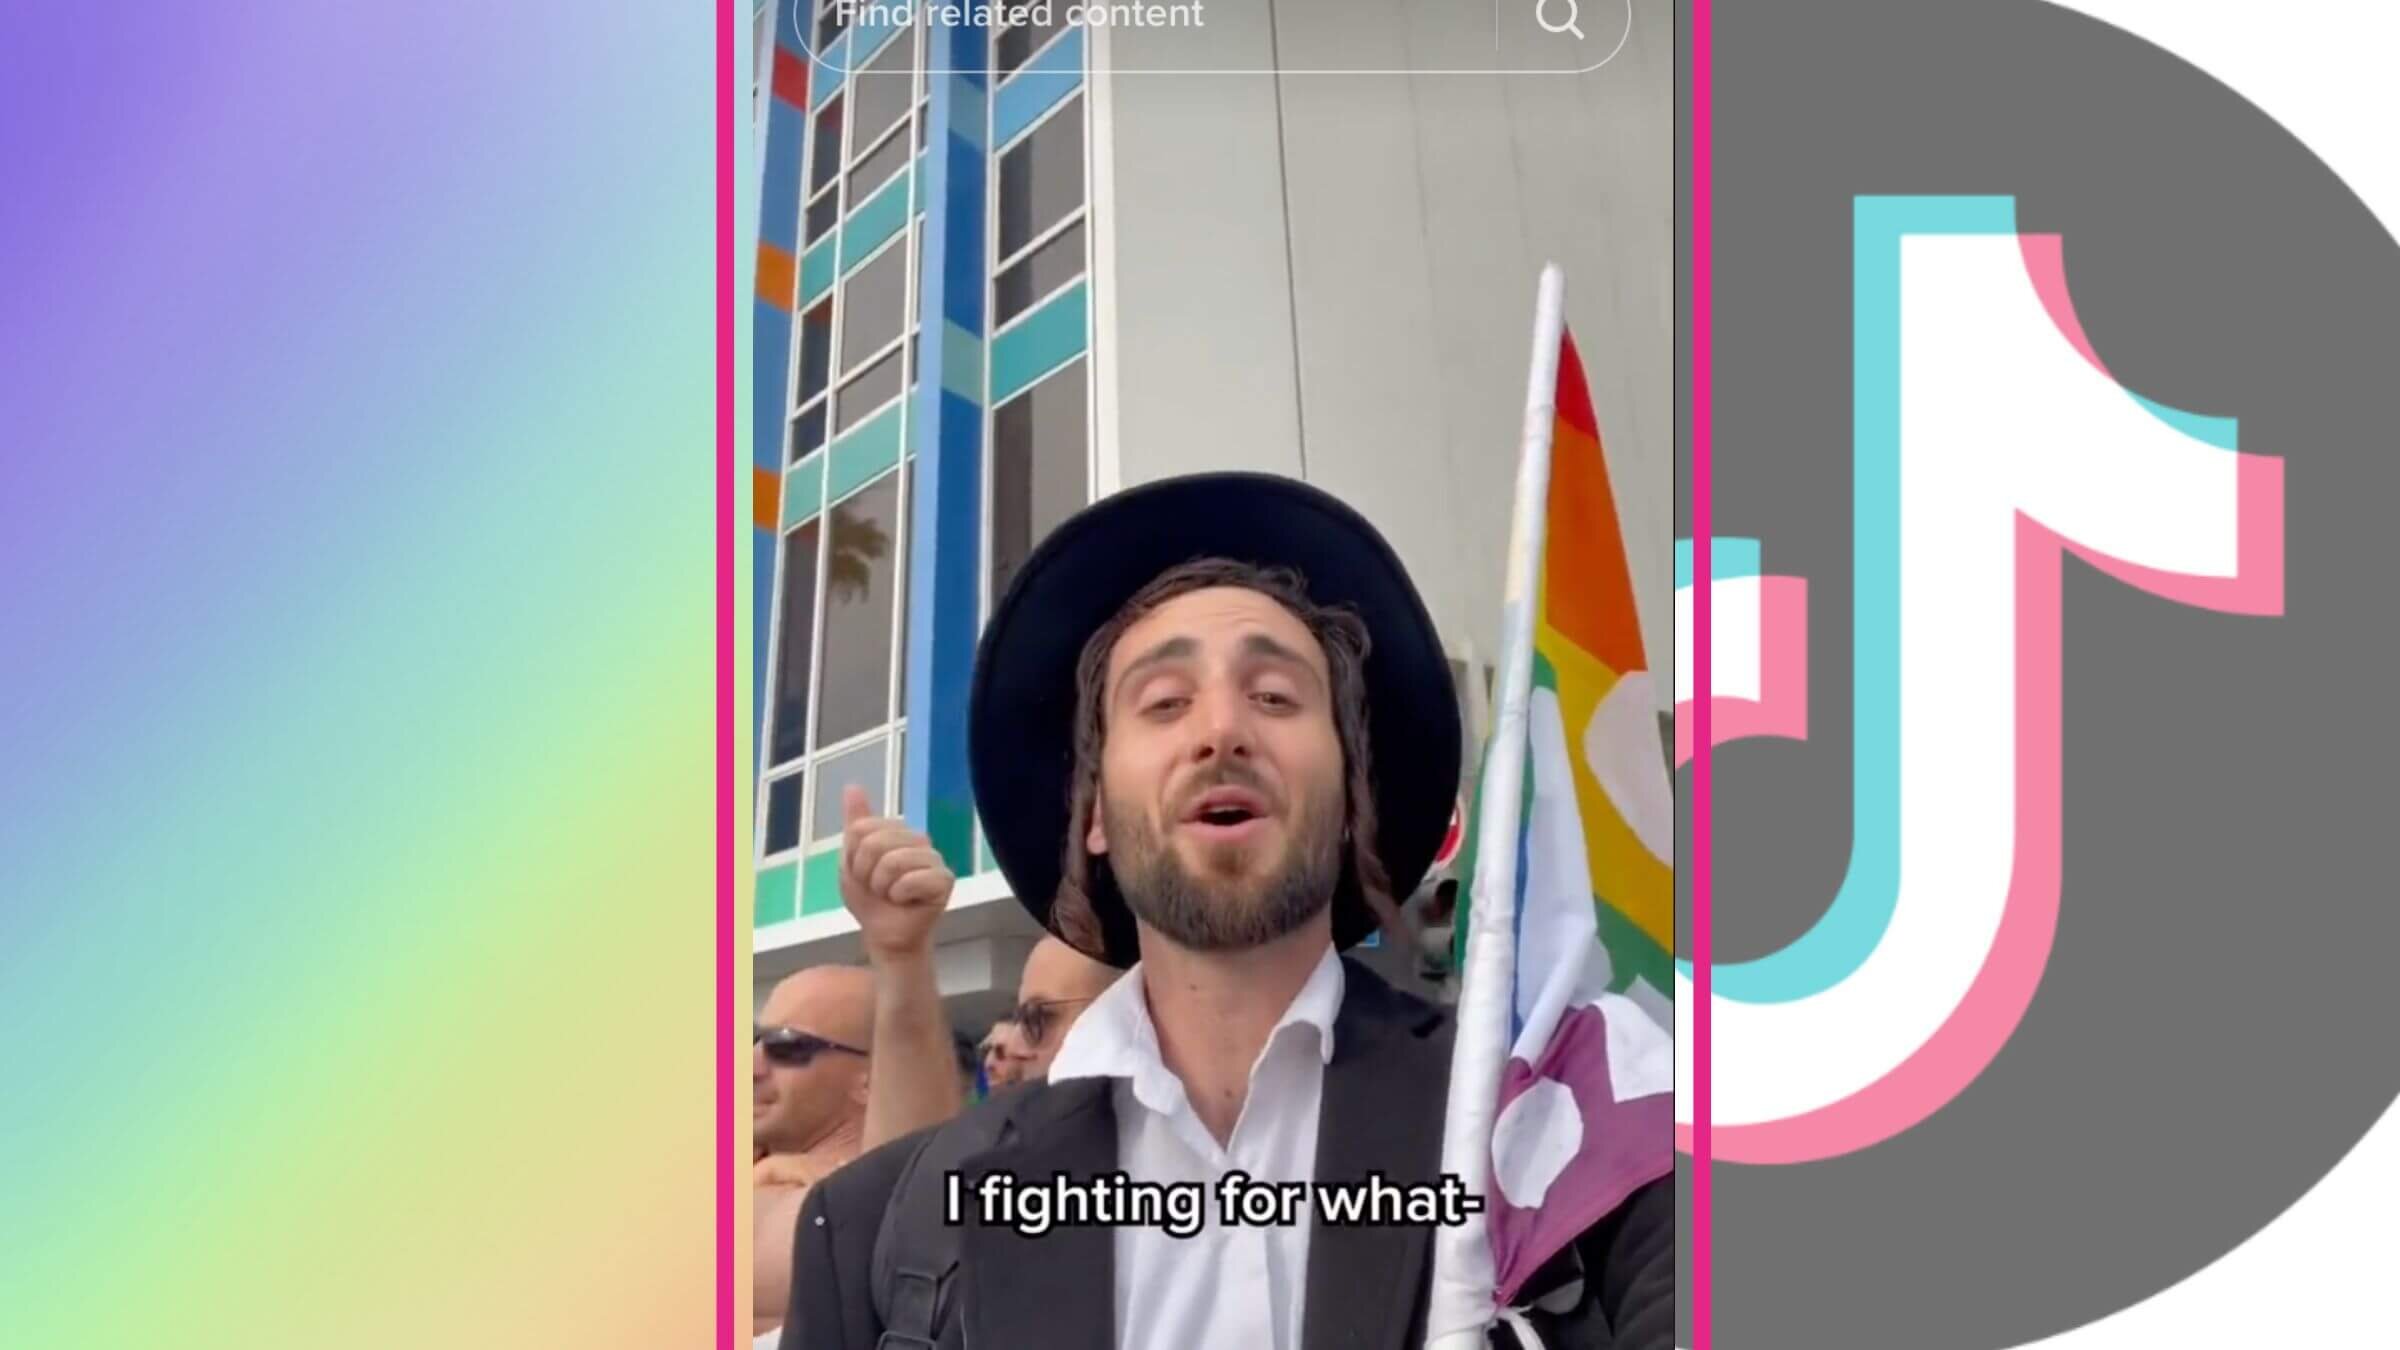 Erez Oved, a secular Israeli, pretended to be a gay Haredi man called Yaacov Levi on TikTok.